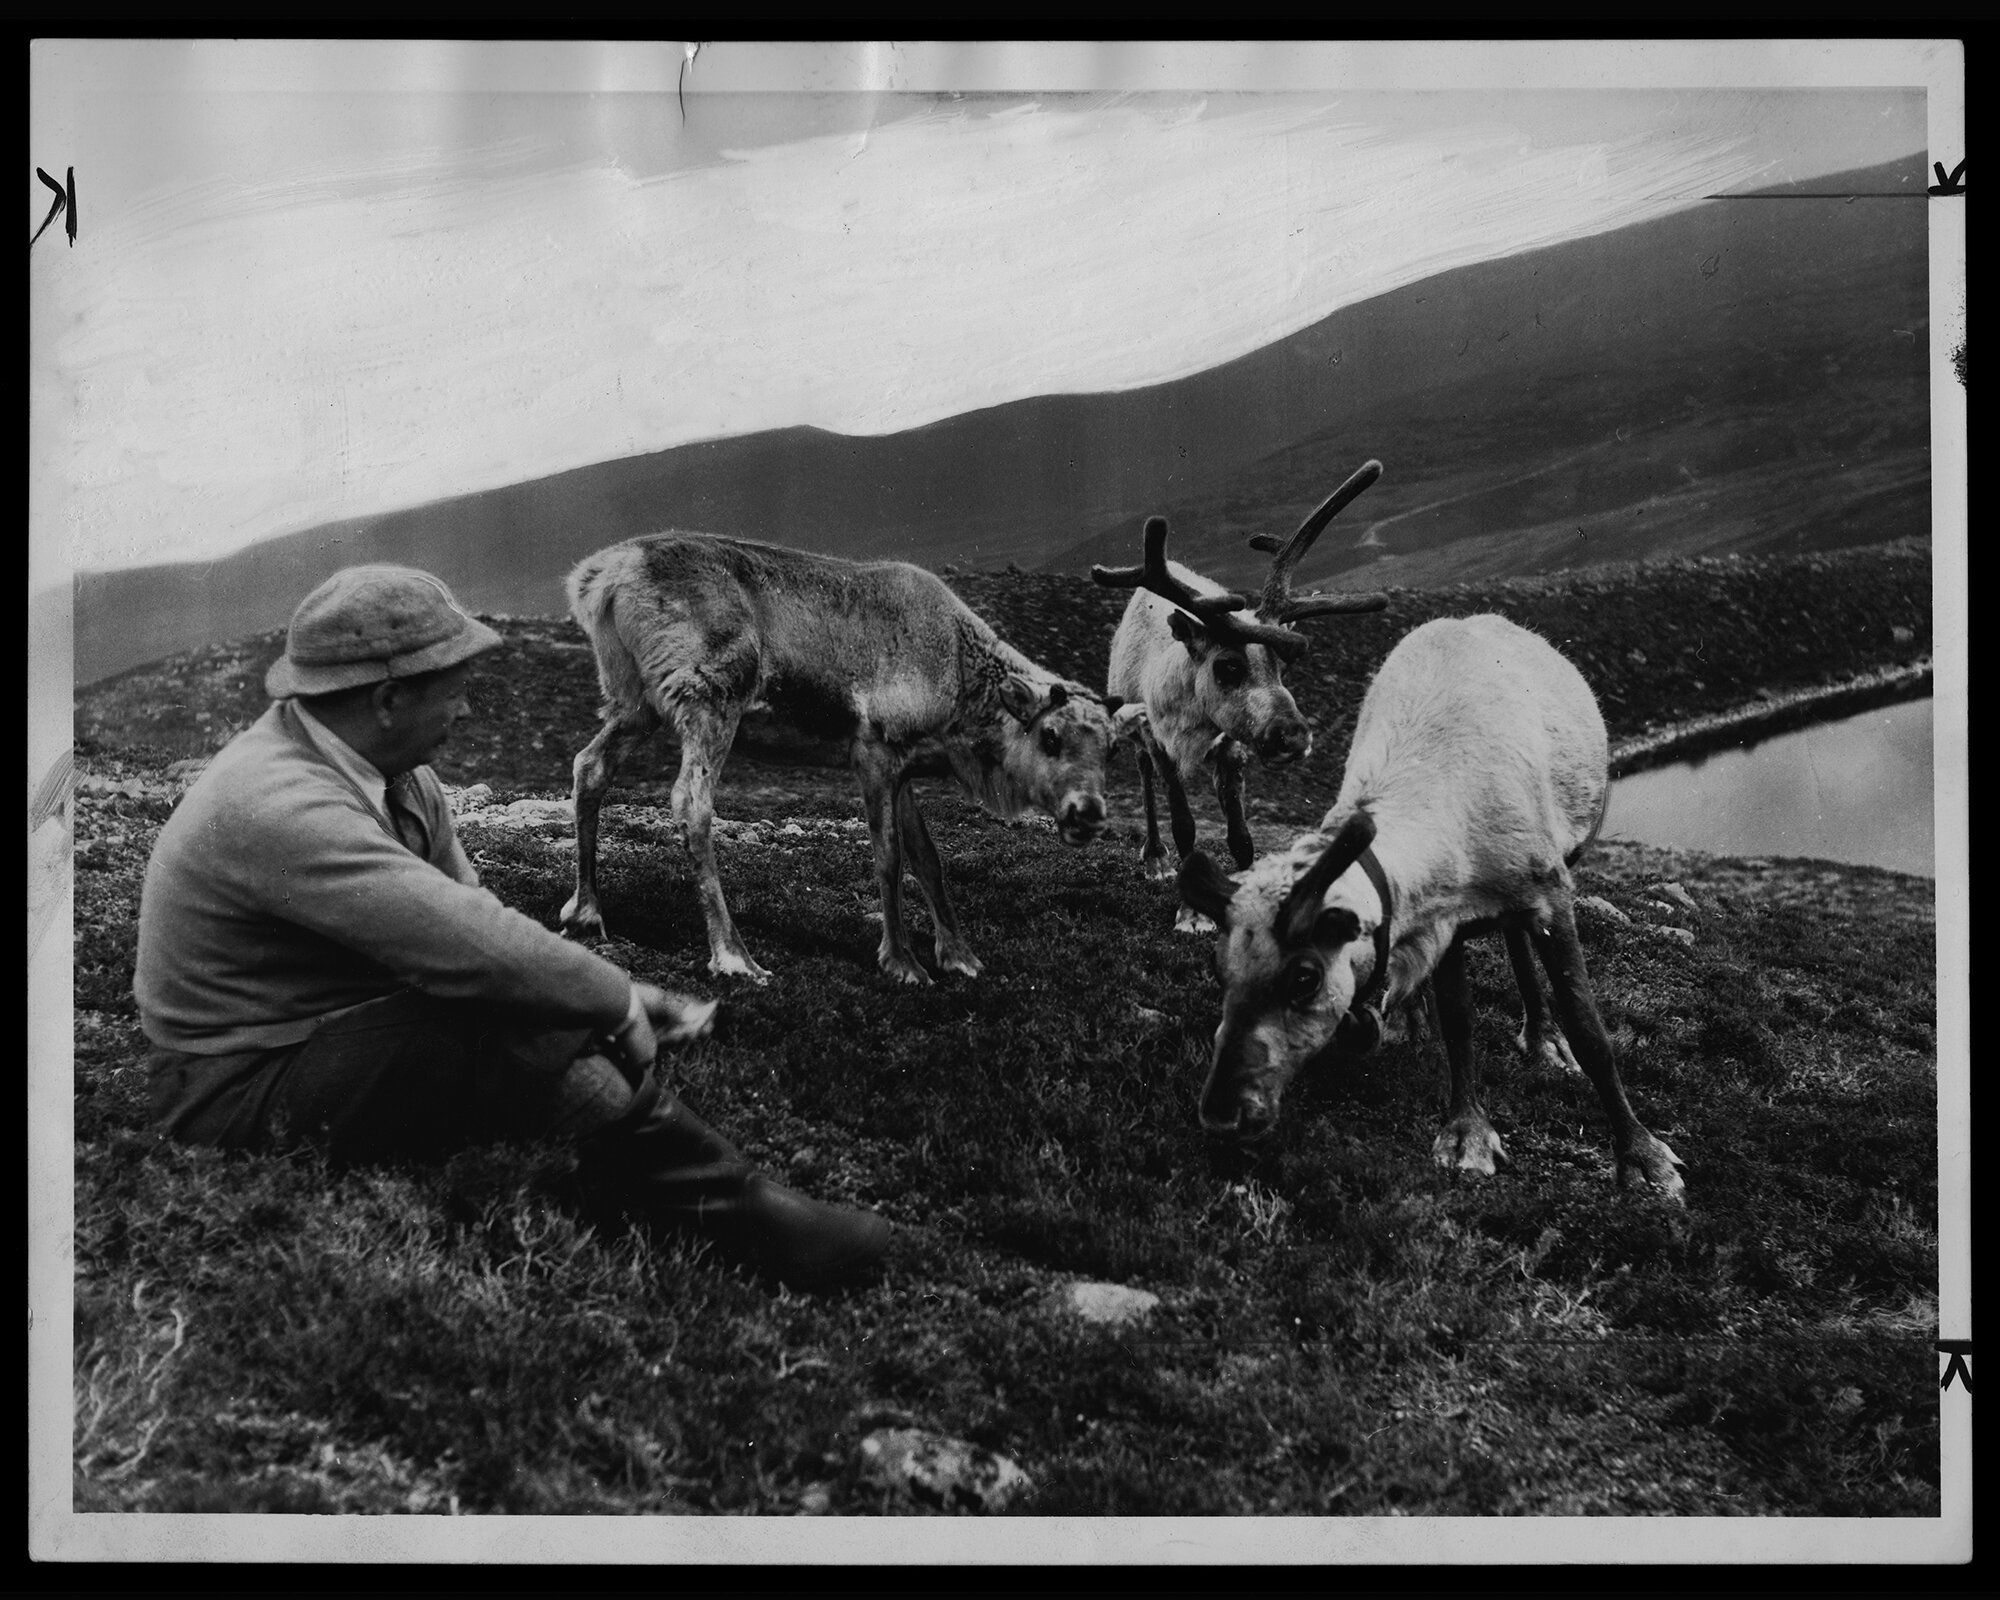  Found photograph of Mikel Utsi with his Lapland reindeer. Cairn Gorm, Scotland, 1959. (For reference only. Photographer and copyright: A. Morris, The Daily Telegraph). 